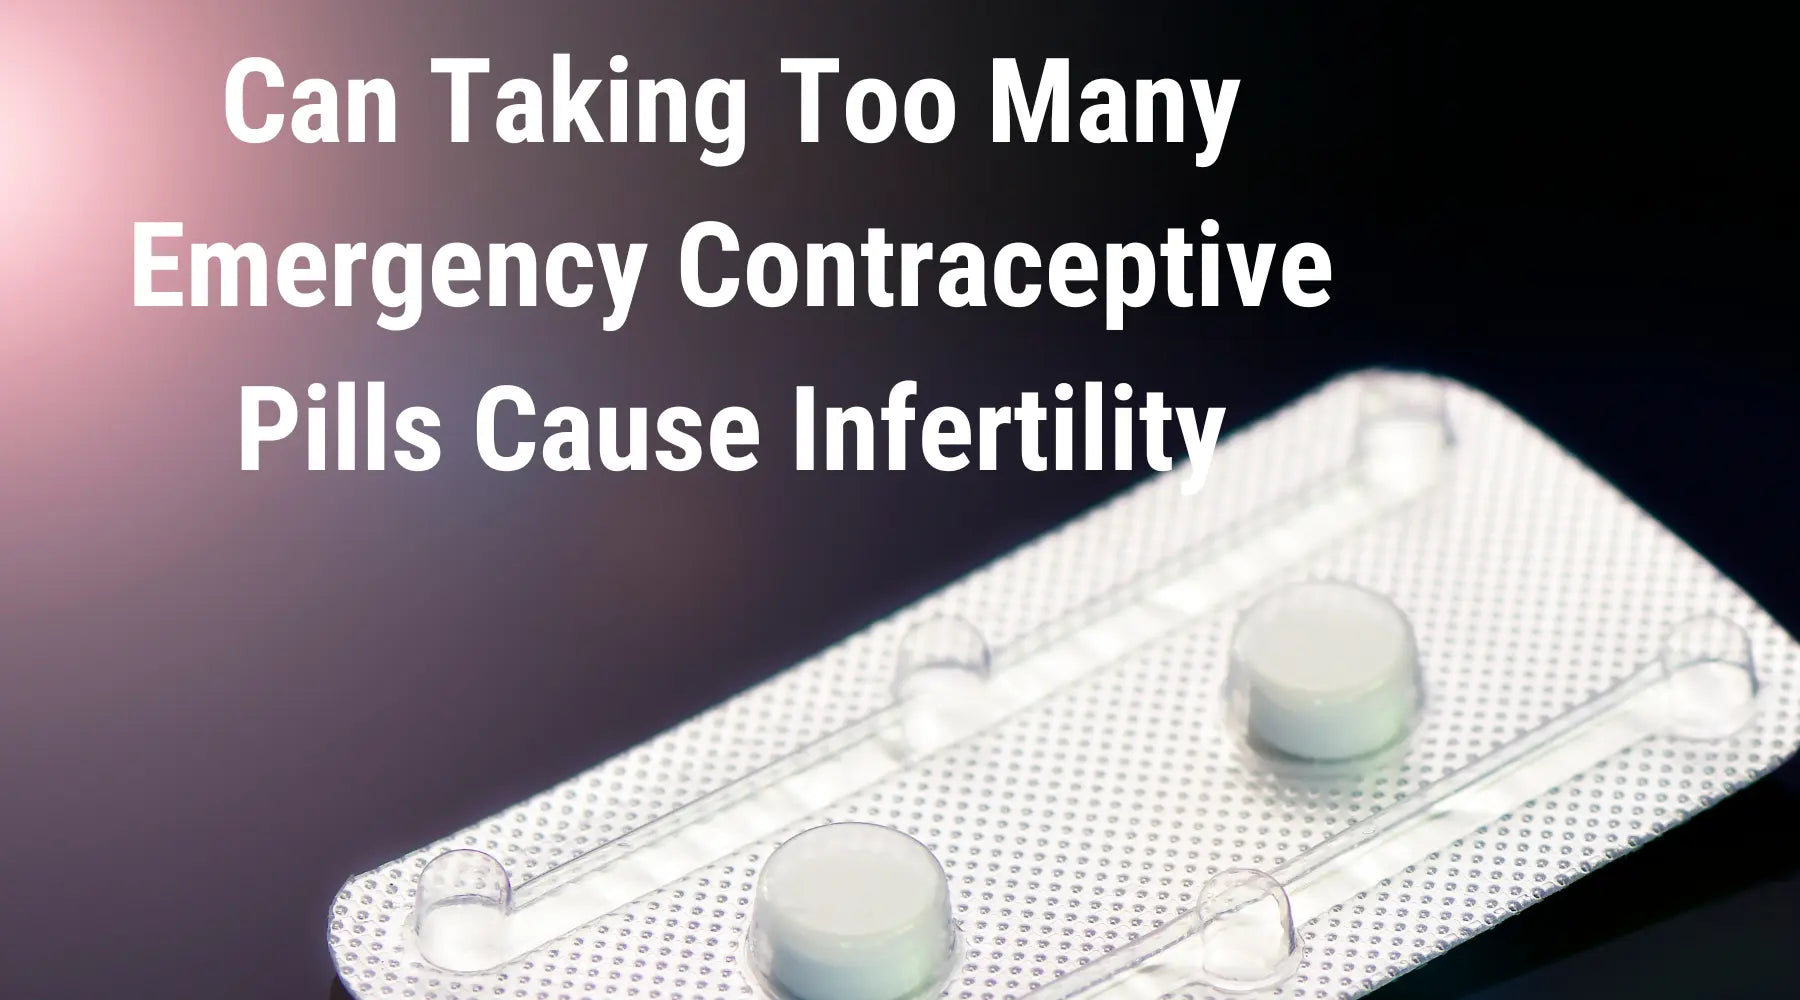 Can Taking Too Many Emergency Contraceptive Pills Cause Infertility